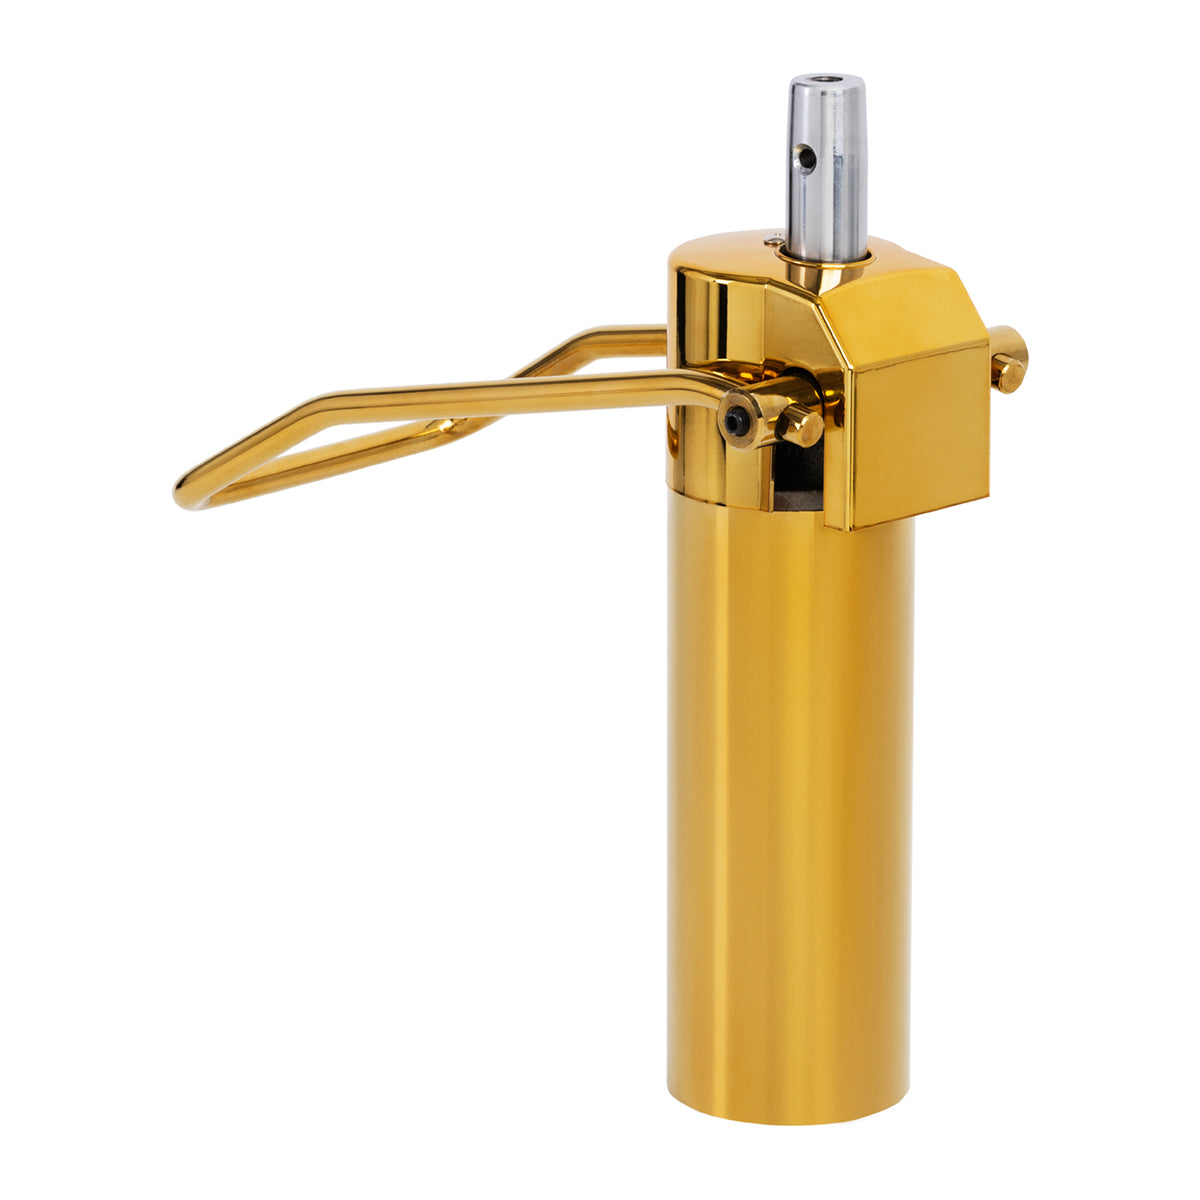 ACTUATOR FOR THE HAIRDRESSING CHAIR D04 GOLD